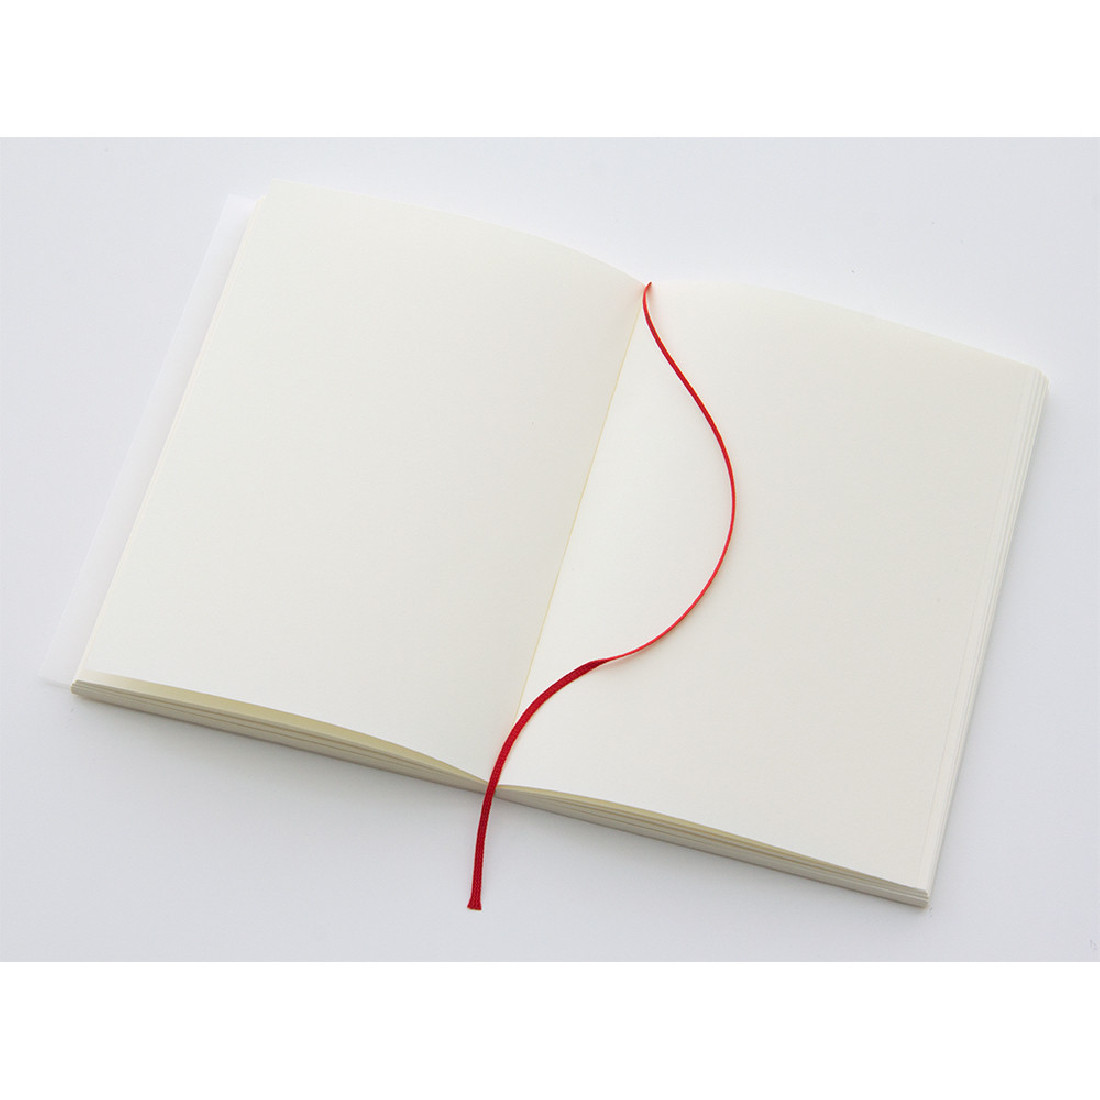 Midori MD Notebook A6 148x105 mm, 176 pages, glassine paper cover, Blank, Bookmark string, Label stickers, Thread-stitched book-binding (15287006)